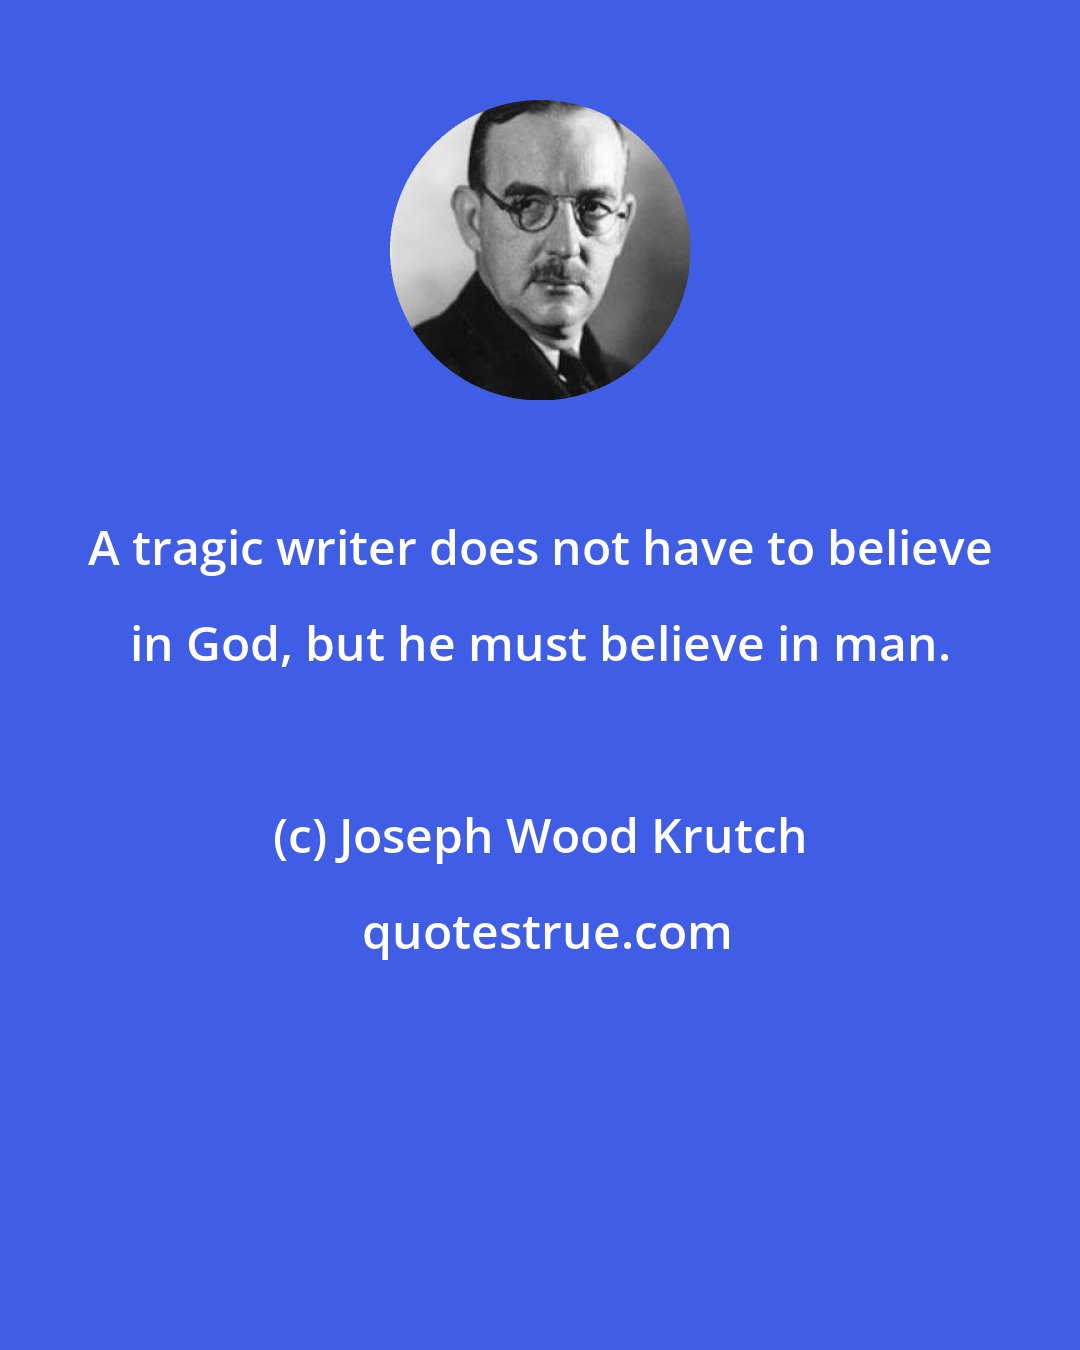 Joseph Wood Krutch: A tragic writer does not have to believe in God, but he must believe in man.